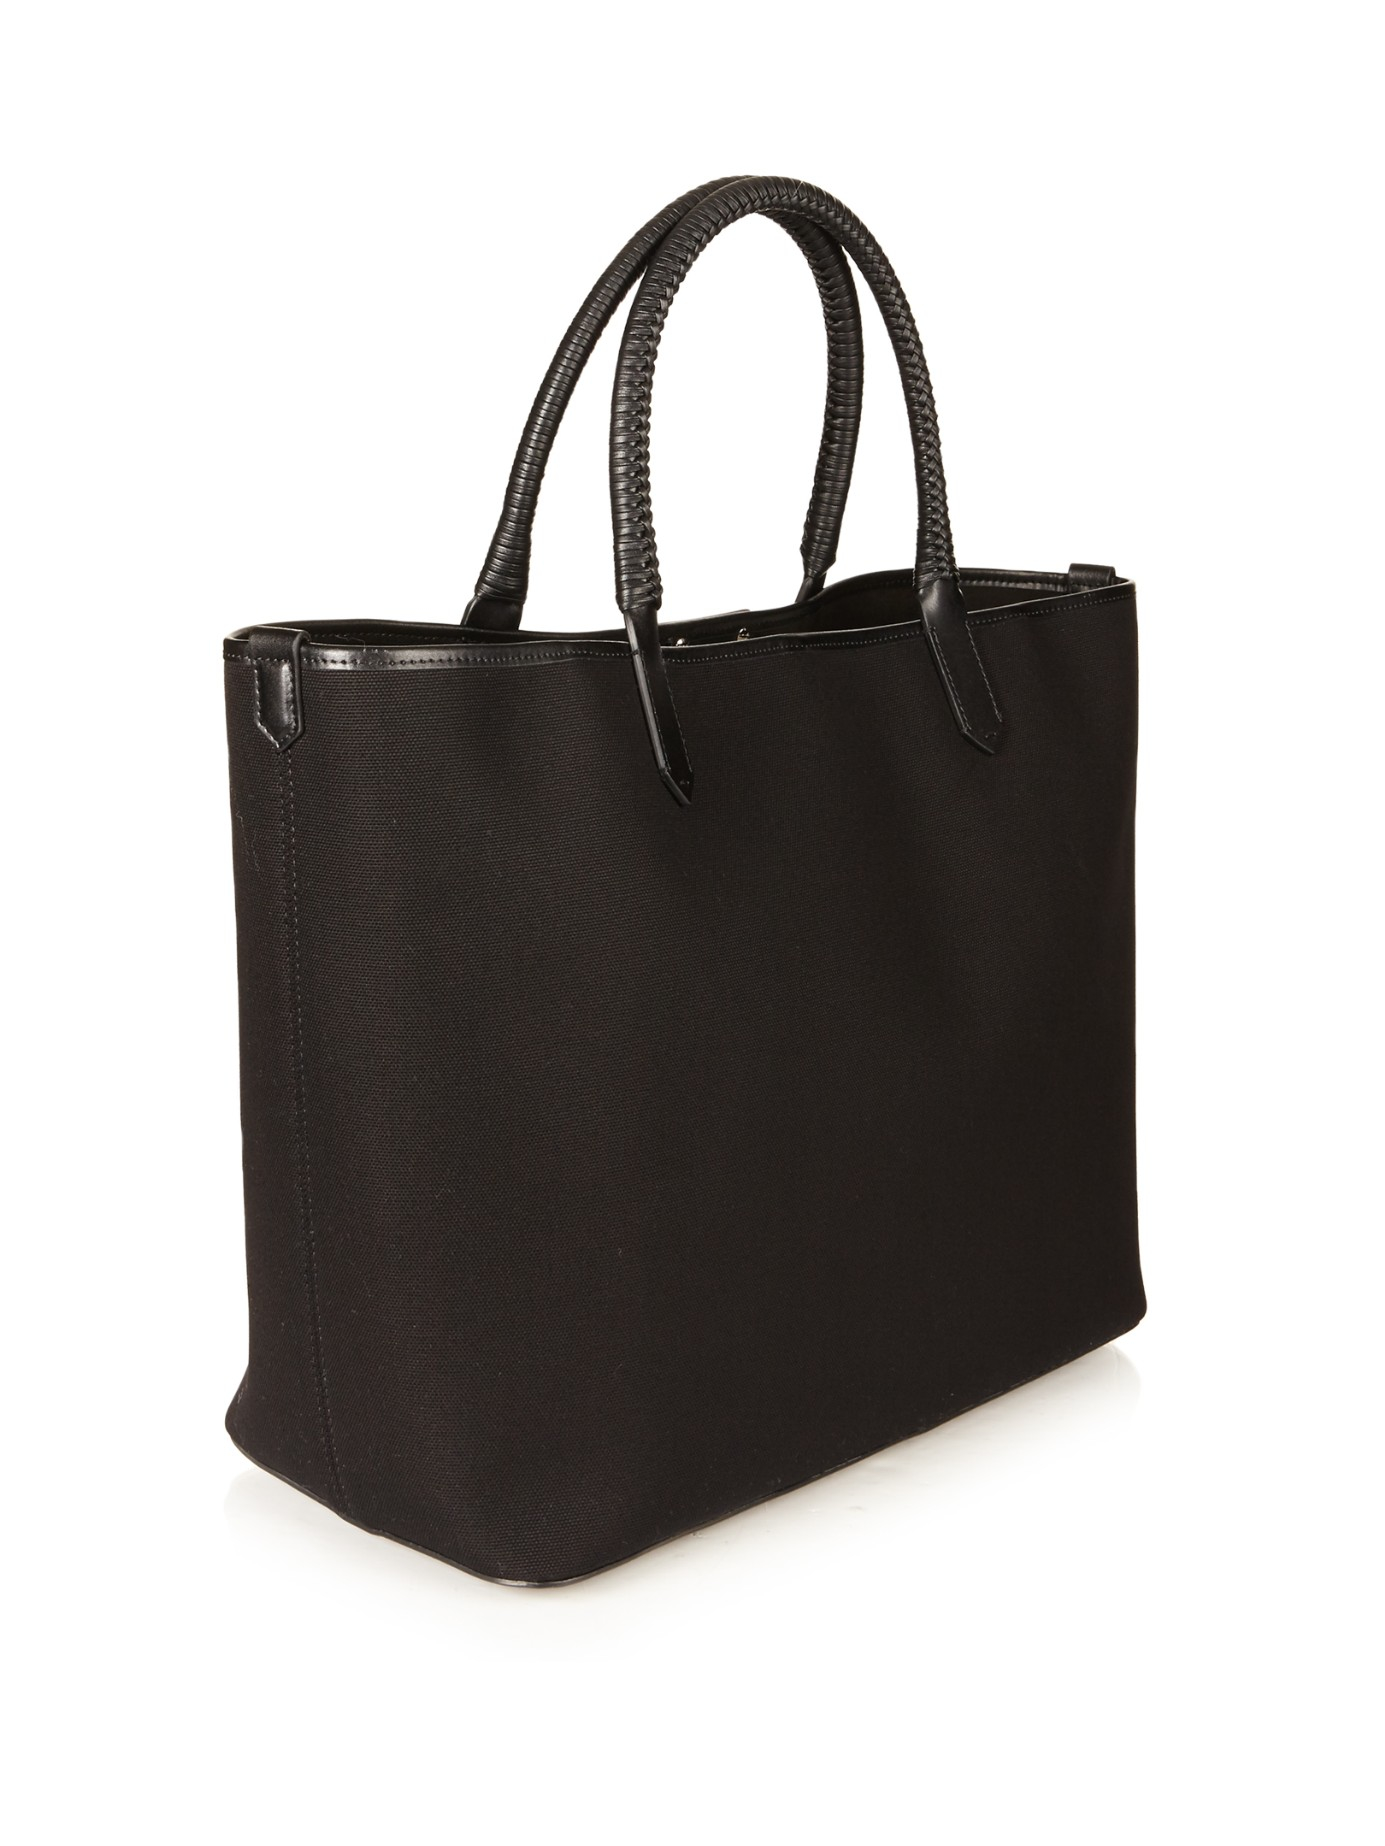 Lyst - Givenchy Antigona Large Canvas Tote in Black